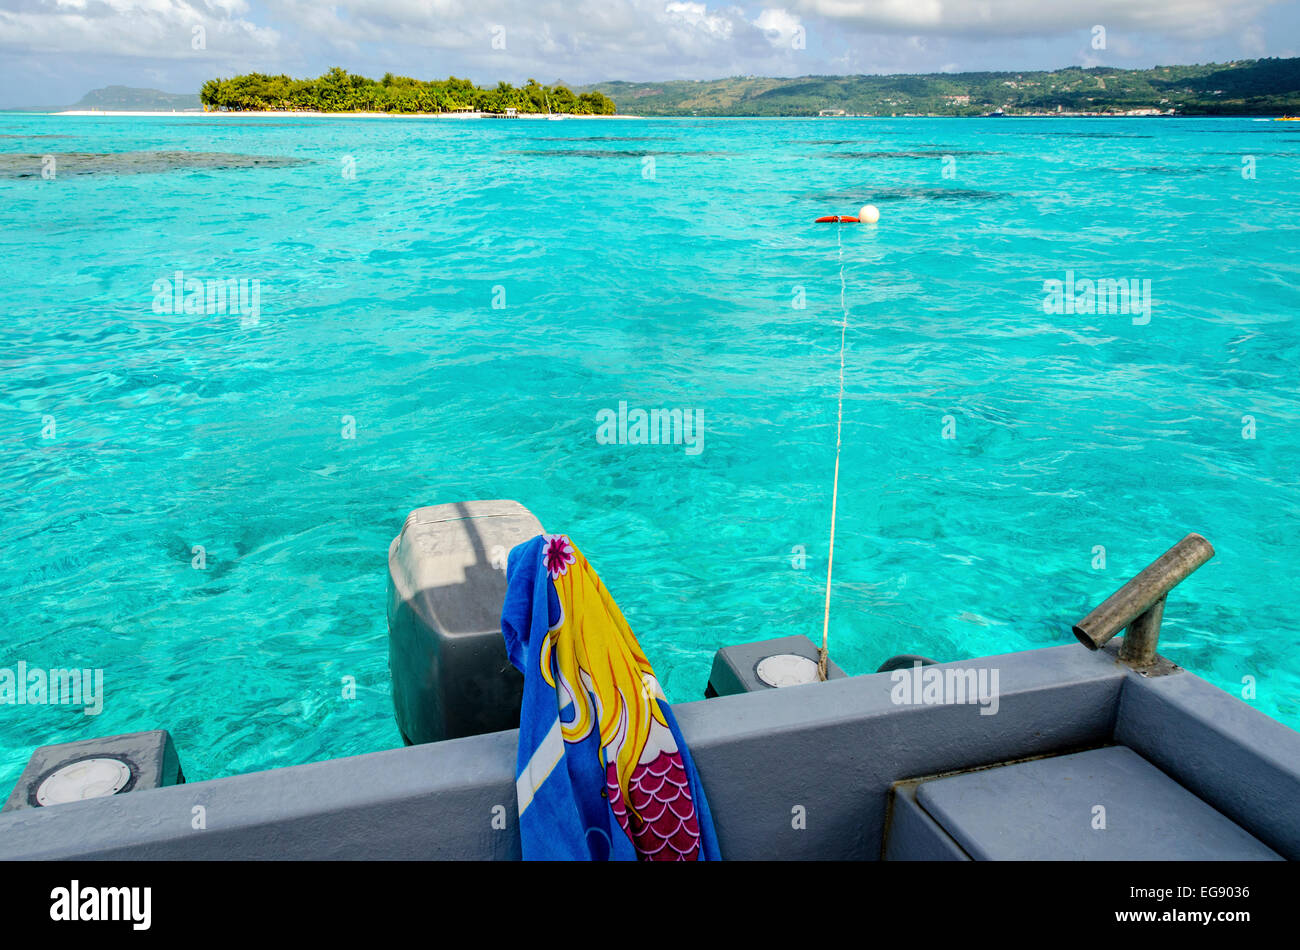 In protected water off the coast of Saipan. Stock Photo